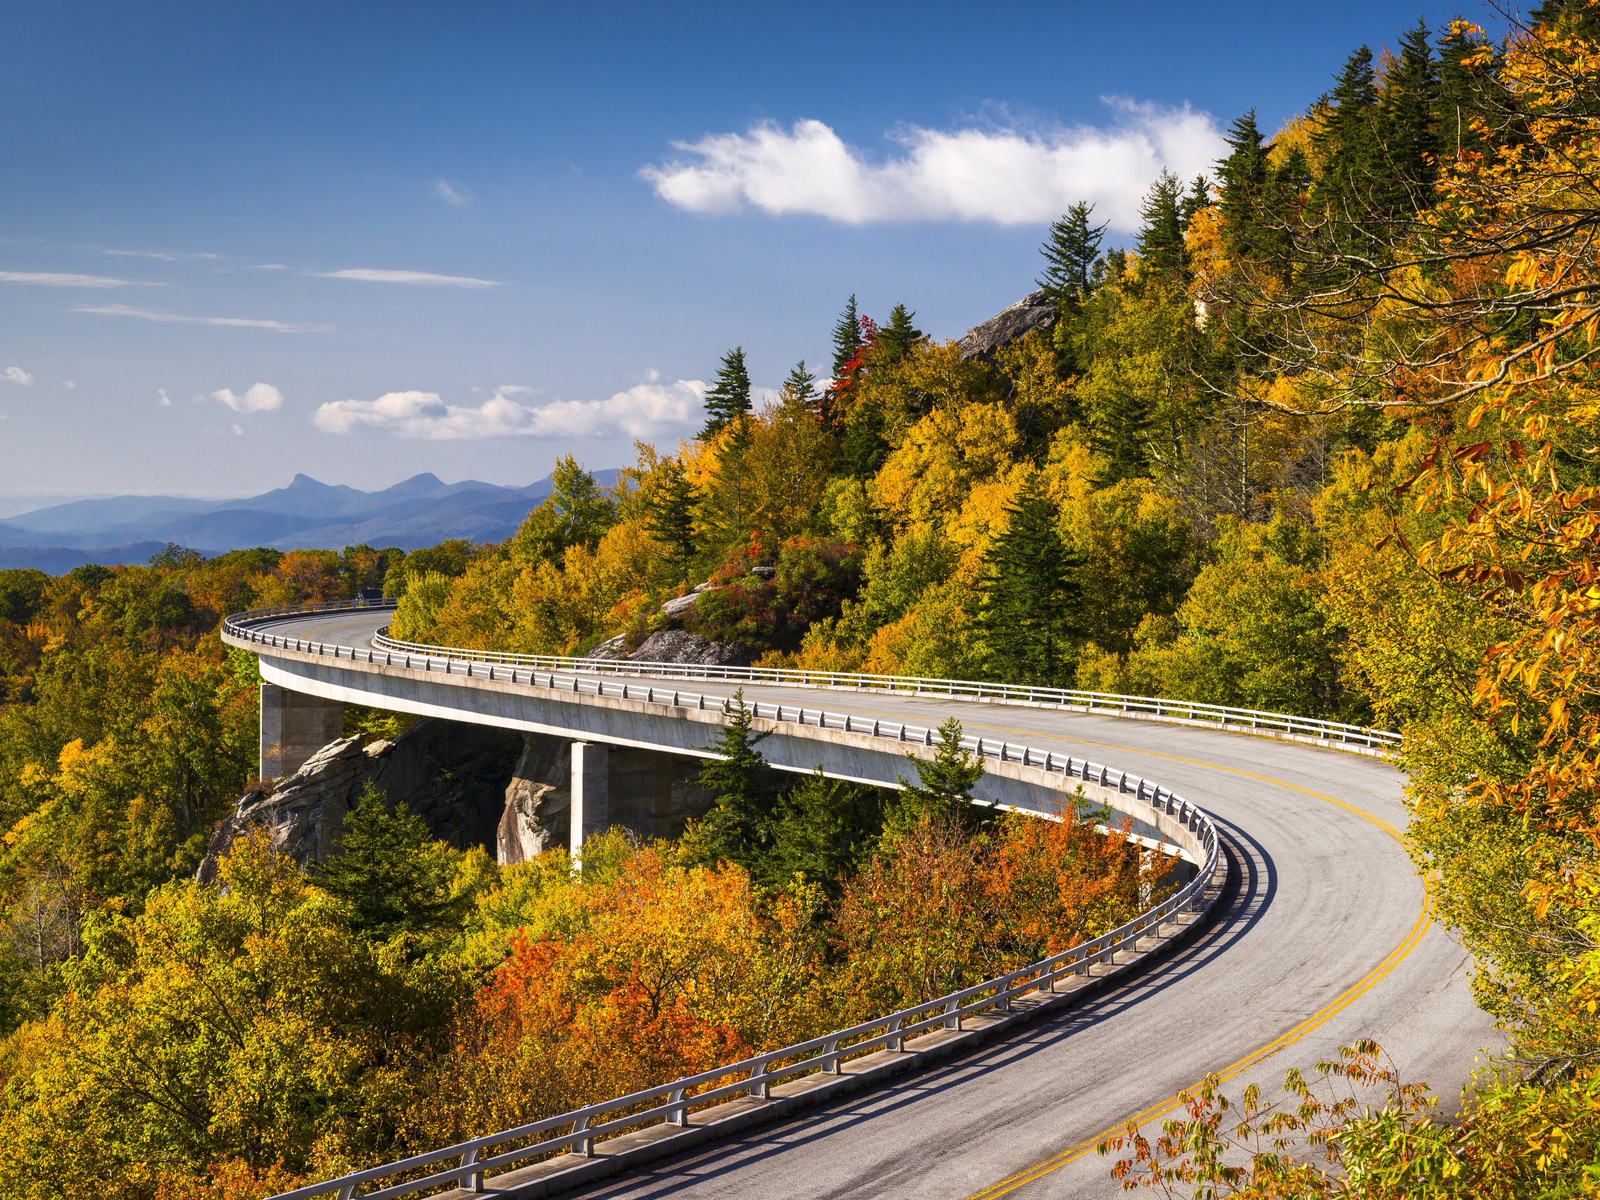 America's longest linear park is one of the best things to do in Asheville, NC with a curved road and a scenic view of Blue Ridge Mountains